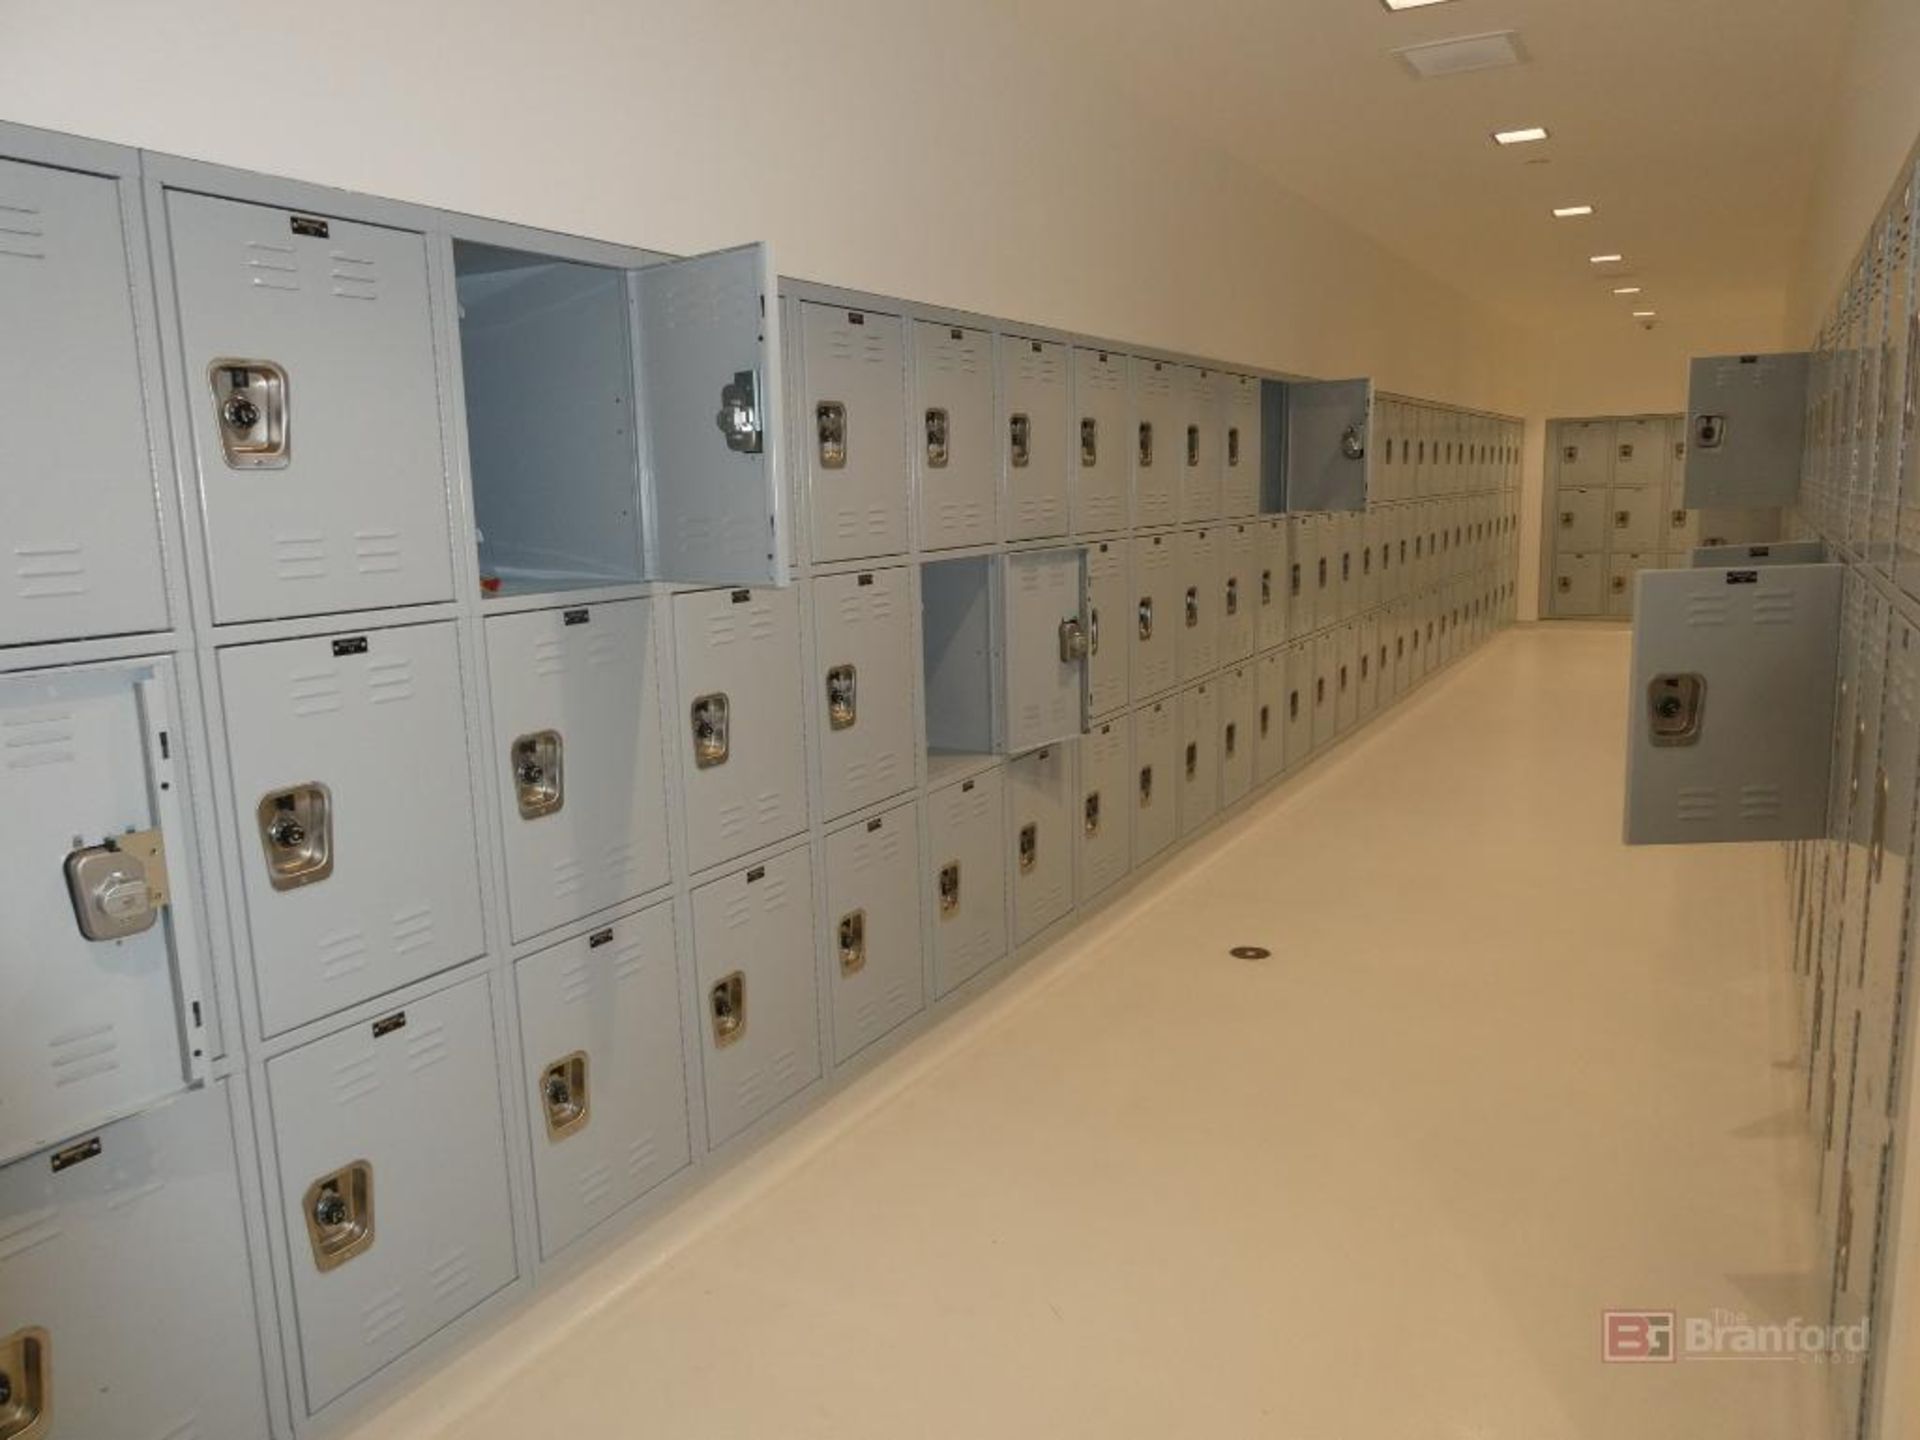 (612) Hallowell Lockers w/ Built-In Combination Lock - Image 4 of 6